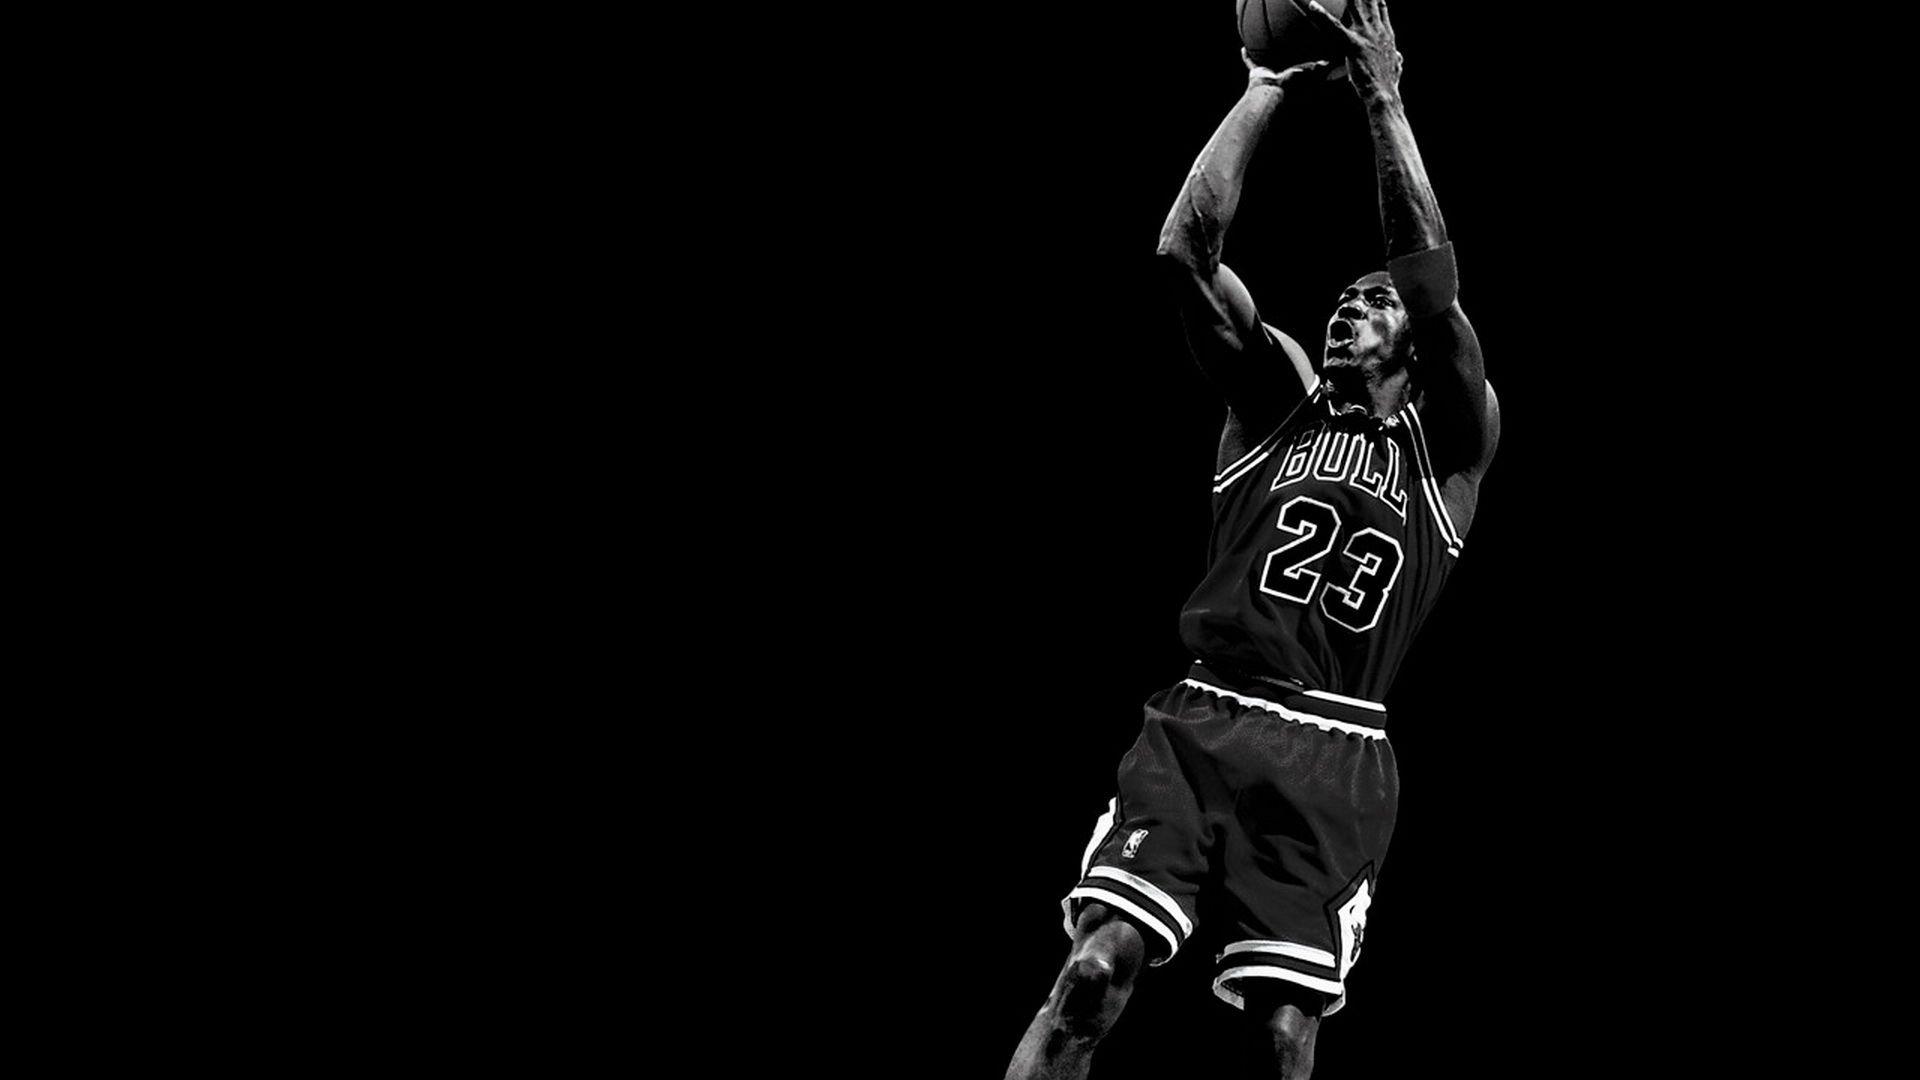 Free download Desktop basketball wallpapers basketball wallpaper basketball  1600x1200 for your Desktop Mobile  Tablet  Explore 22 Basketball Black  and White Wallpapers  Wallpaper Black And White White And Black Wallpapers 